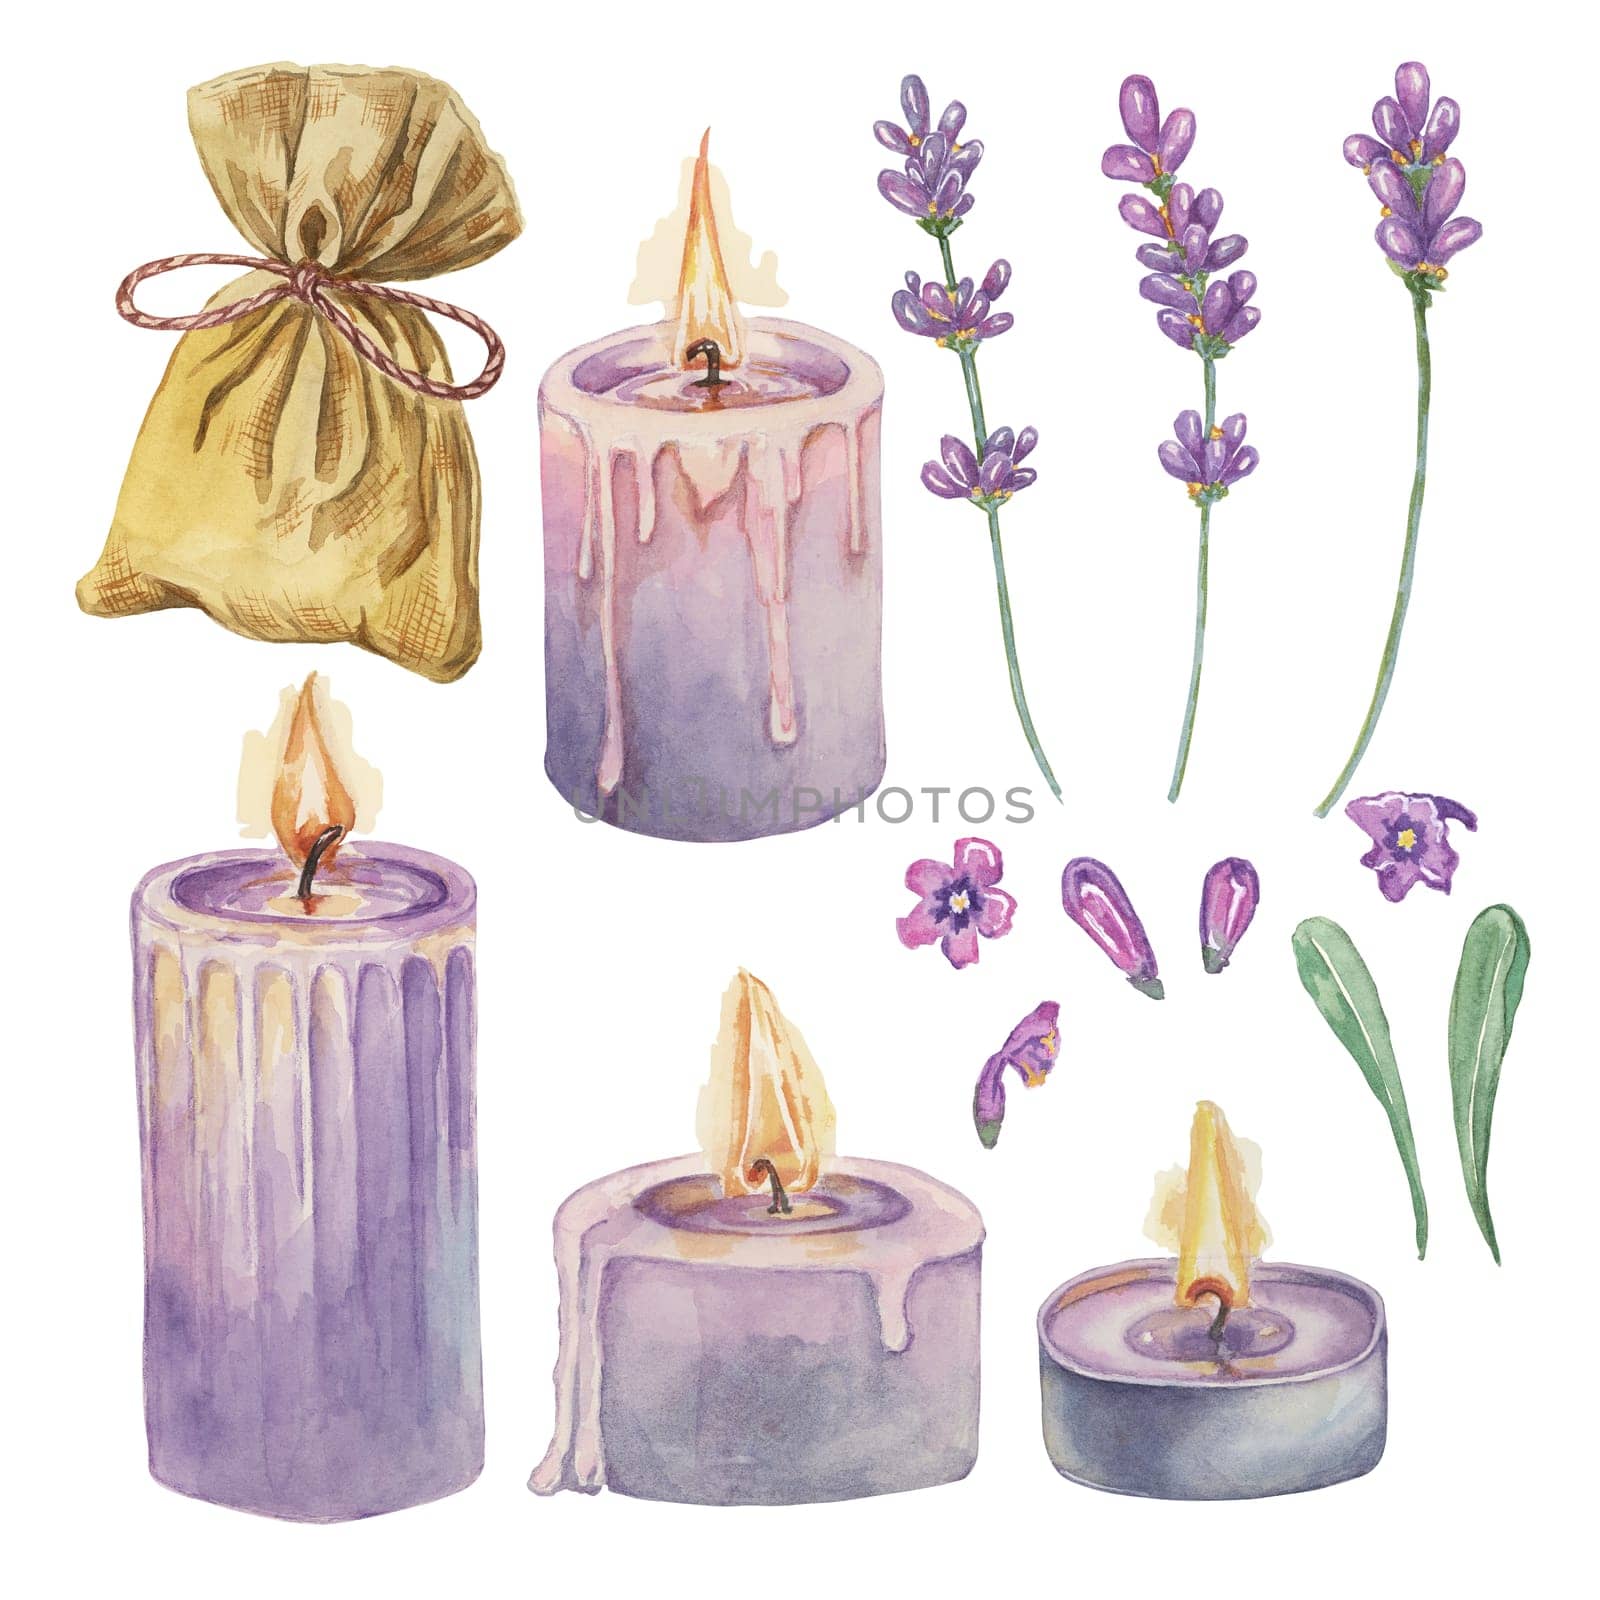 Lavender aromatherapy set with lilac candles, flowers and sachet for home fragrance. Home spa fragrance watercolor illustration. Clipart bundle of organic beauty, cosmetic, store label elements